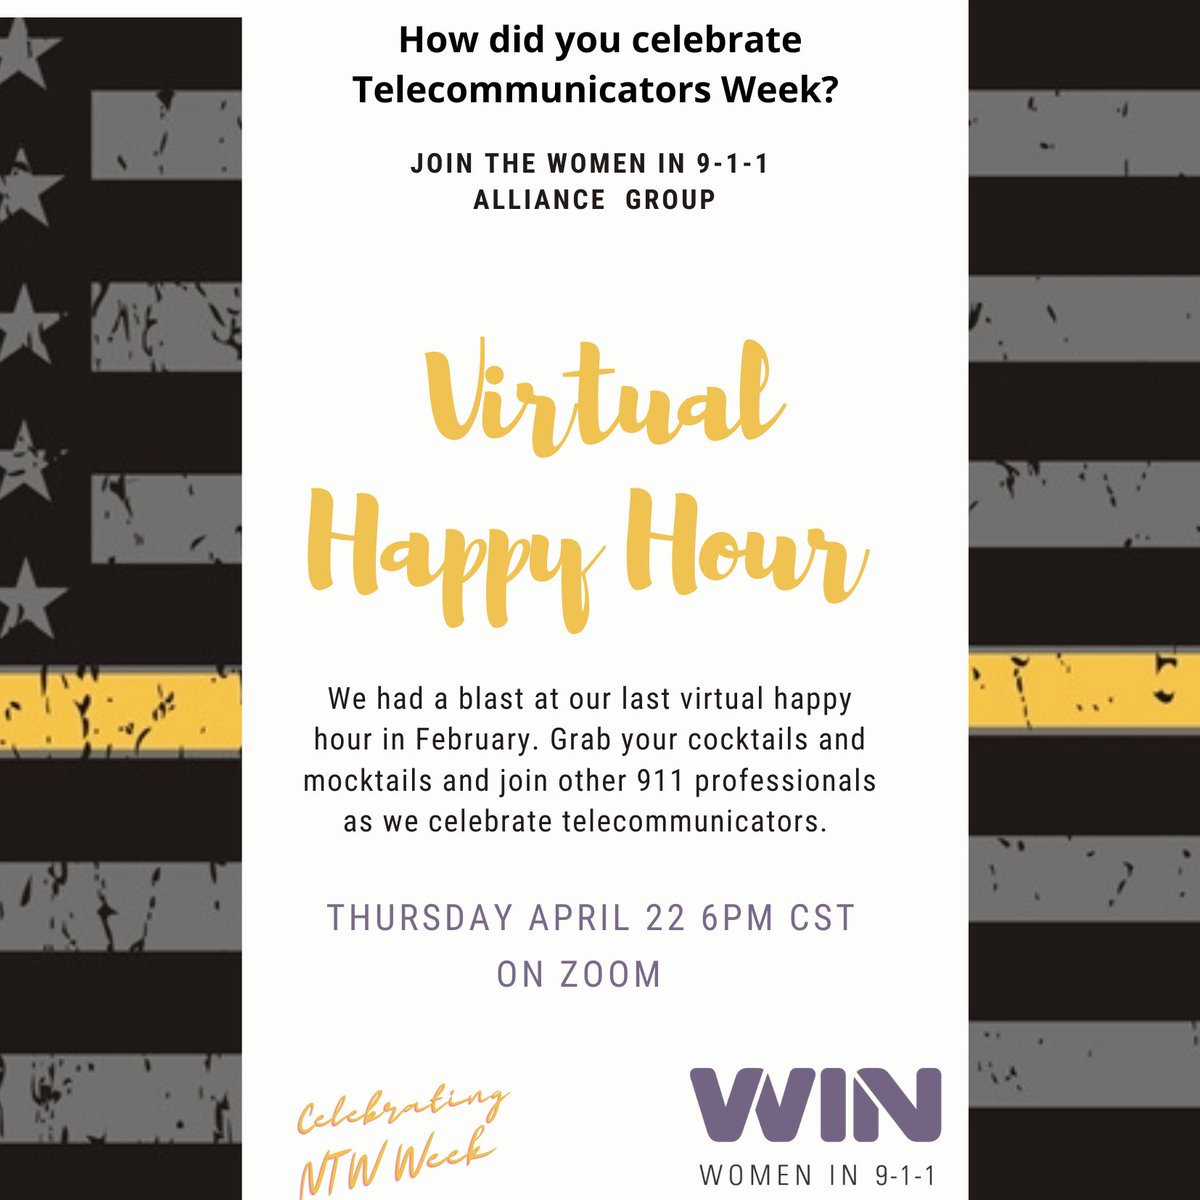 Are you a woman? Are in 9-1-1? Then why haven't you signed up to be a part of @911NENA911's Women in 9-1-1 group! Attend their virtual Happy Hour on April 22! #womenin911